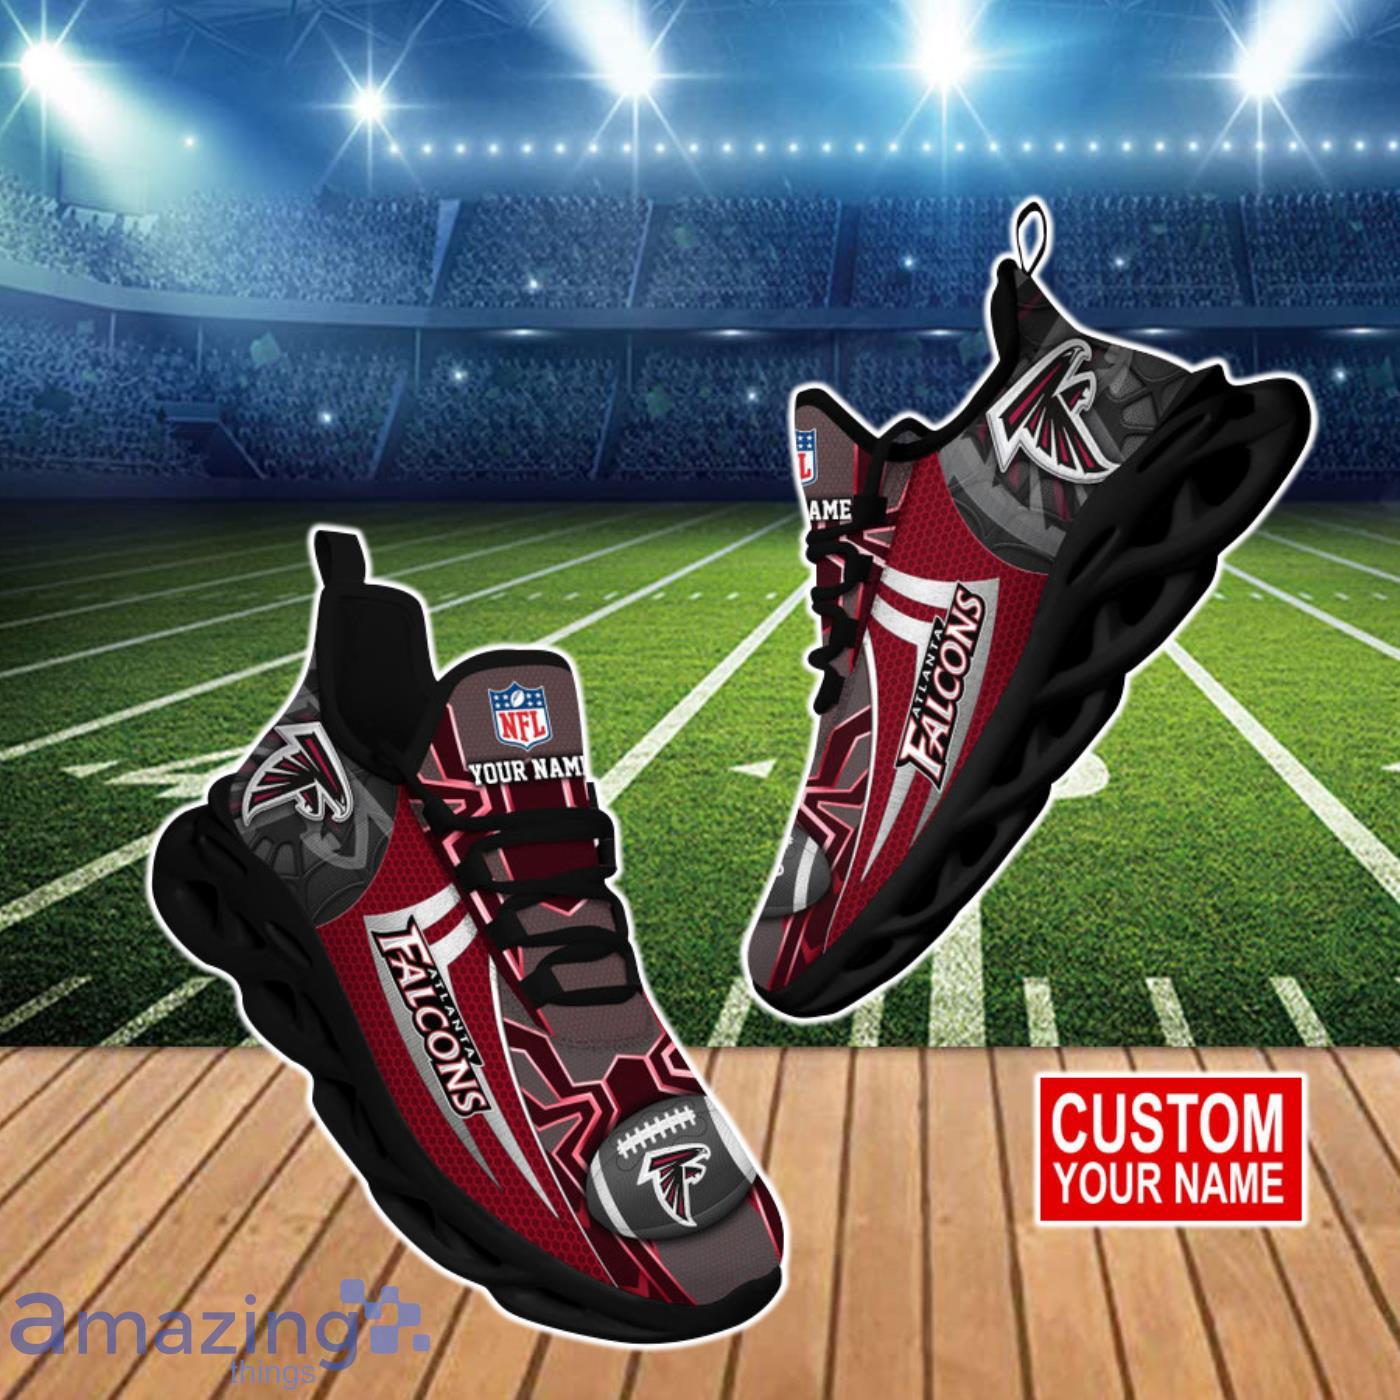 Atlanta Falcons NFL Clunky Max Soul Shoes Personalized For Best Friend Product Photo 1